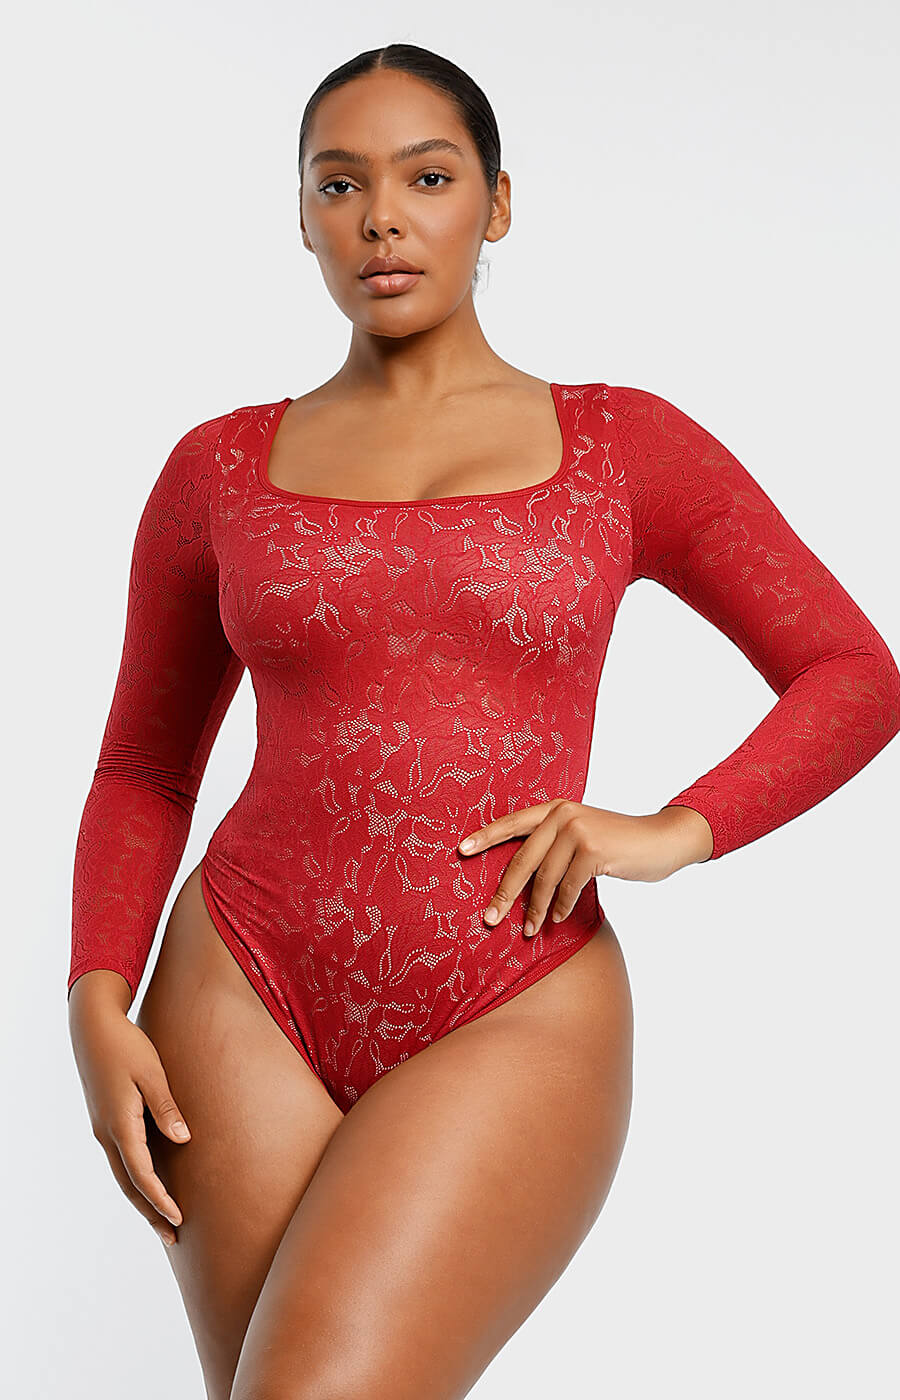 Get Ready For The Holidays With The Shapellx Collection of Body